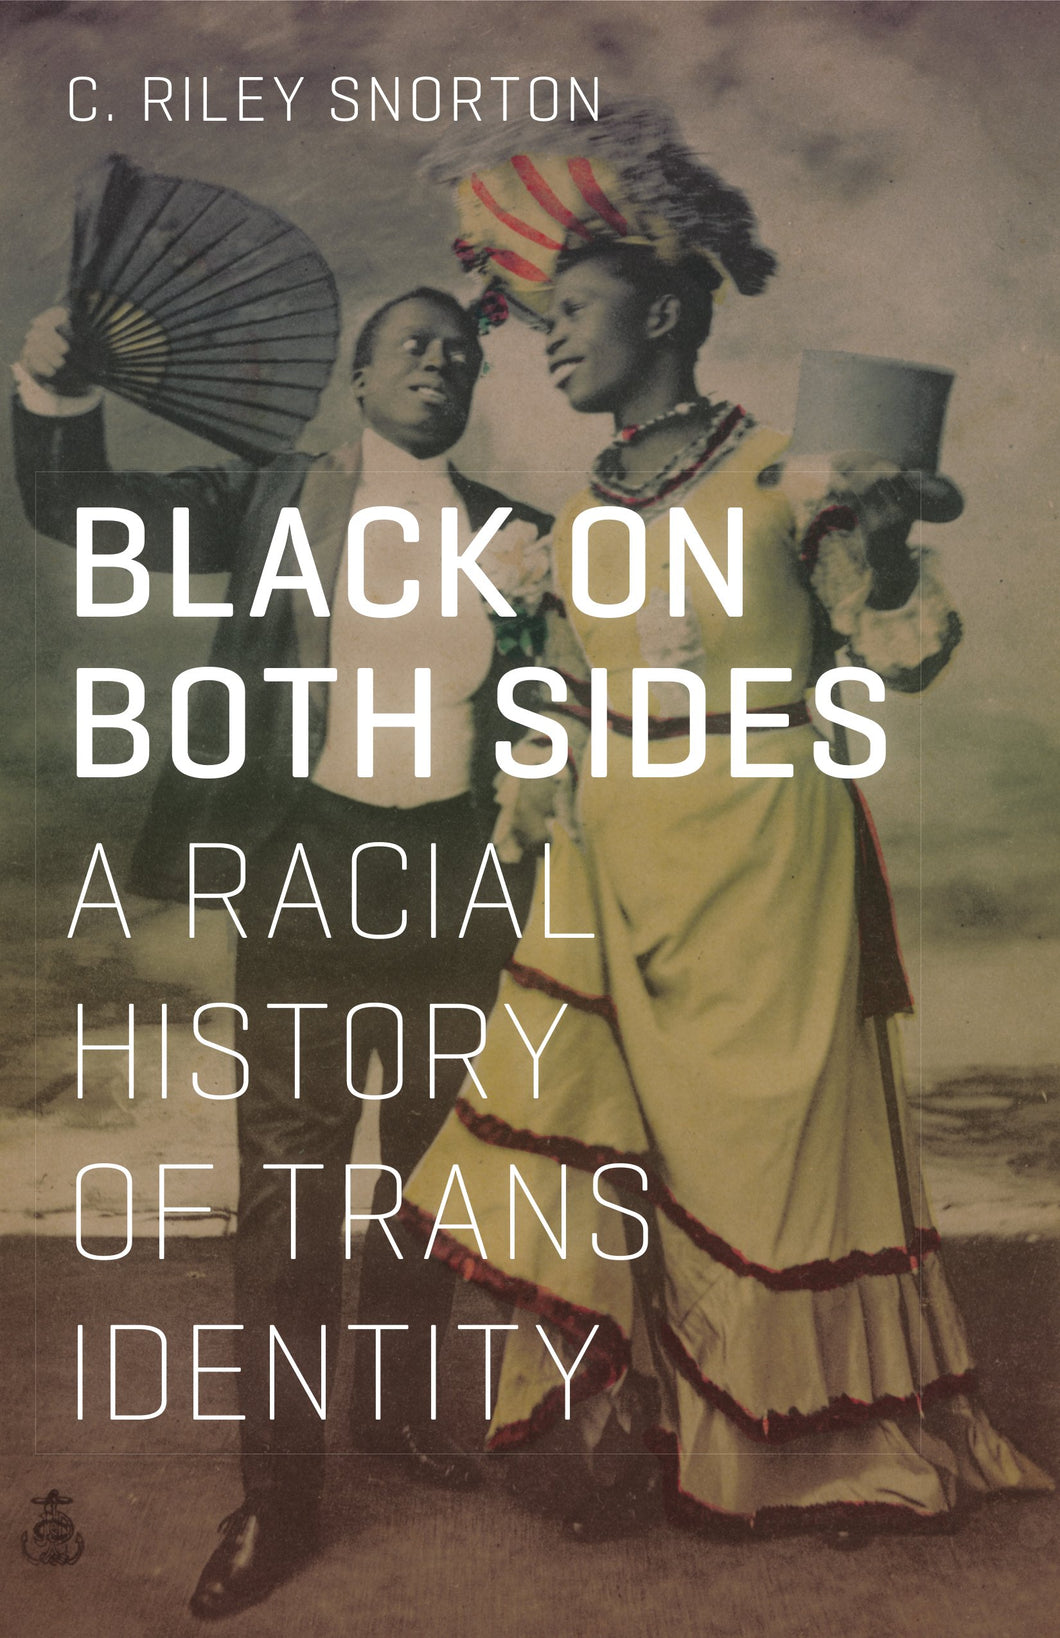 Black On Both Sides: A Racial History Of Trans Identity [C. Riley Snorton]